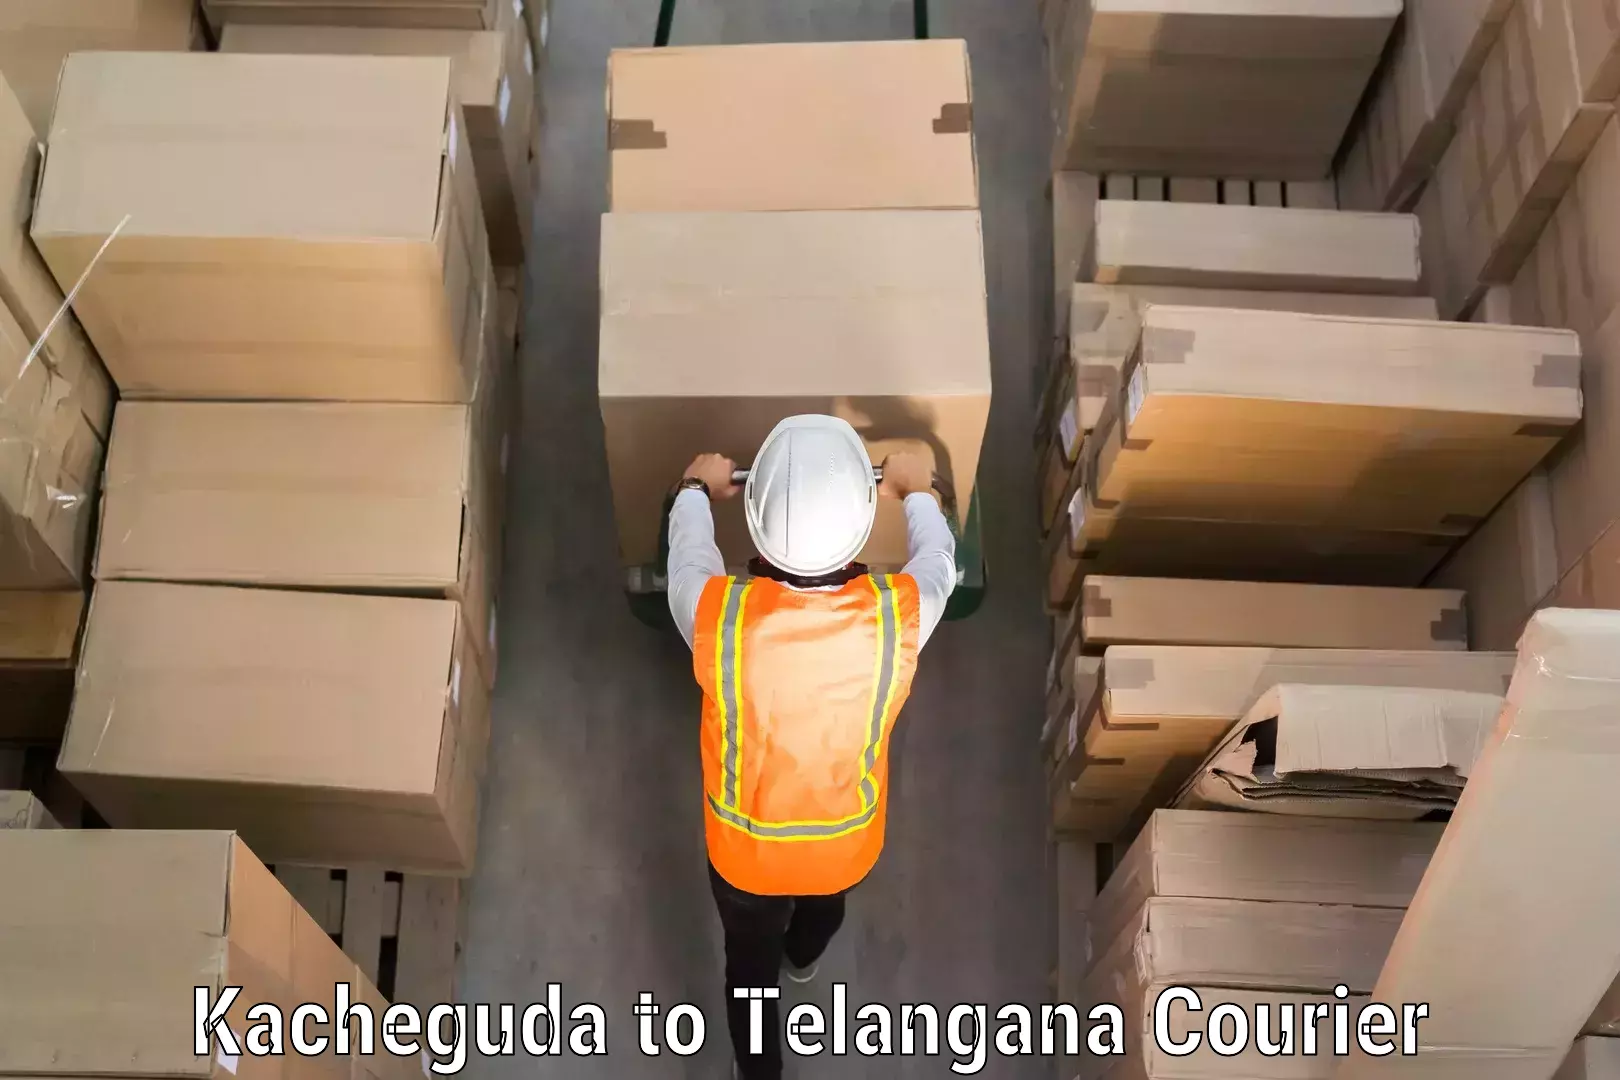 Luggage storage and delivery in Kacheguda to Vemulawada